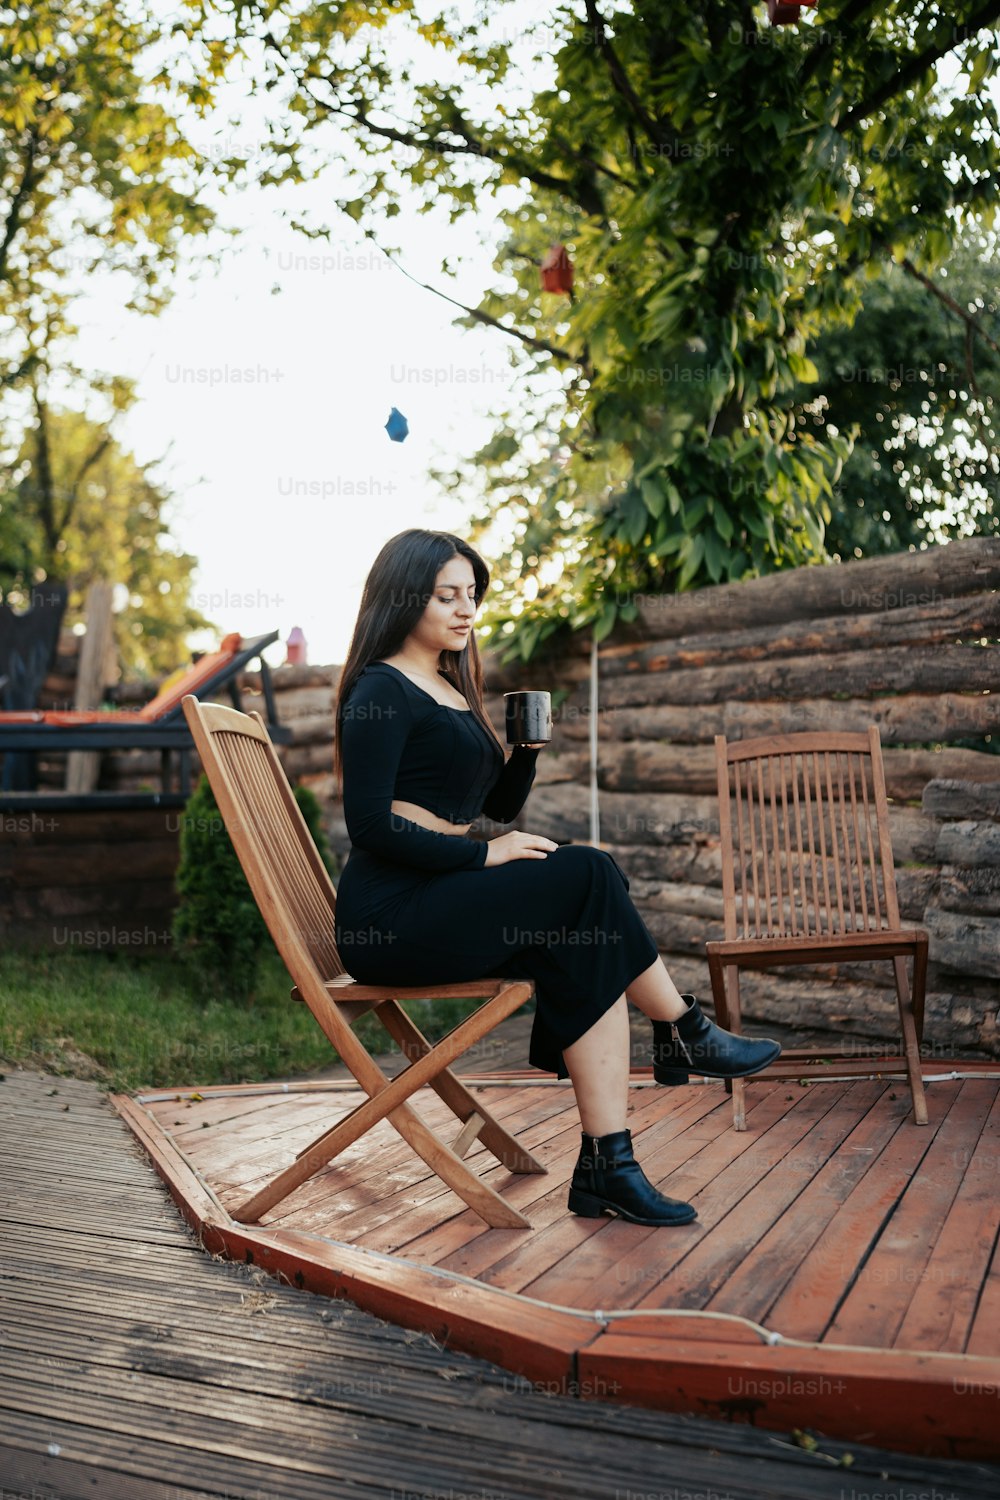 a woman sitting on a wooden chair holding a glass of wine